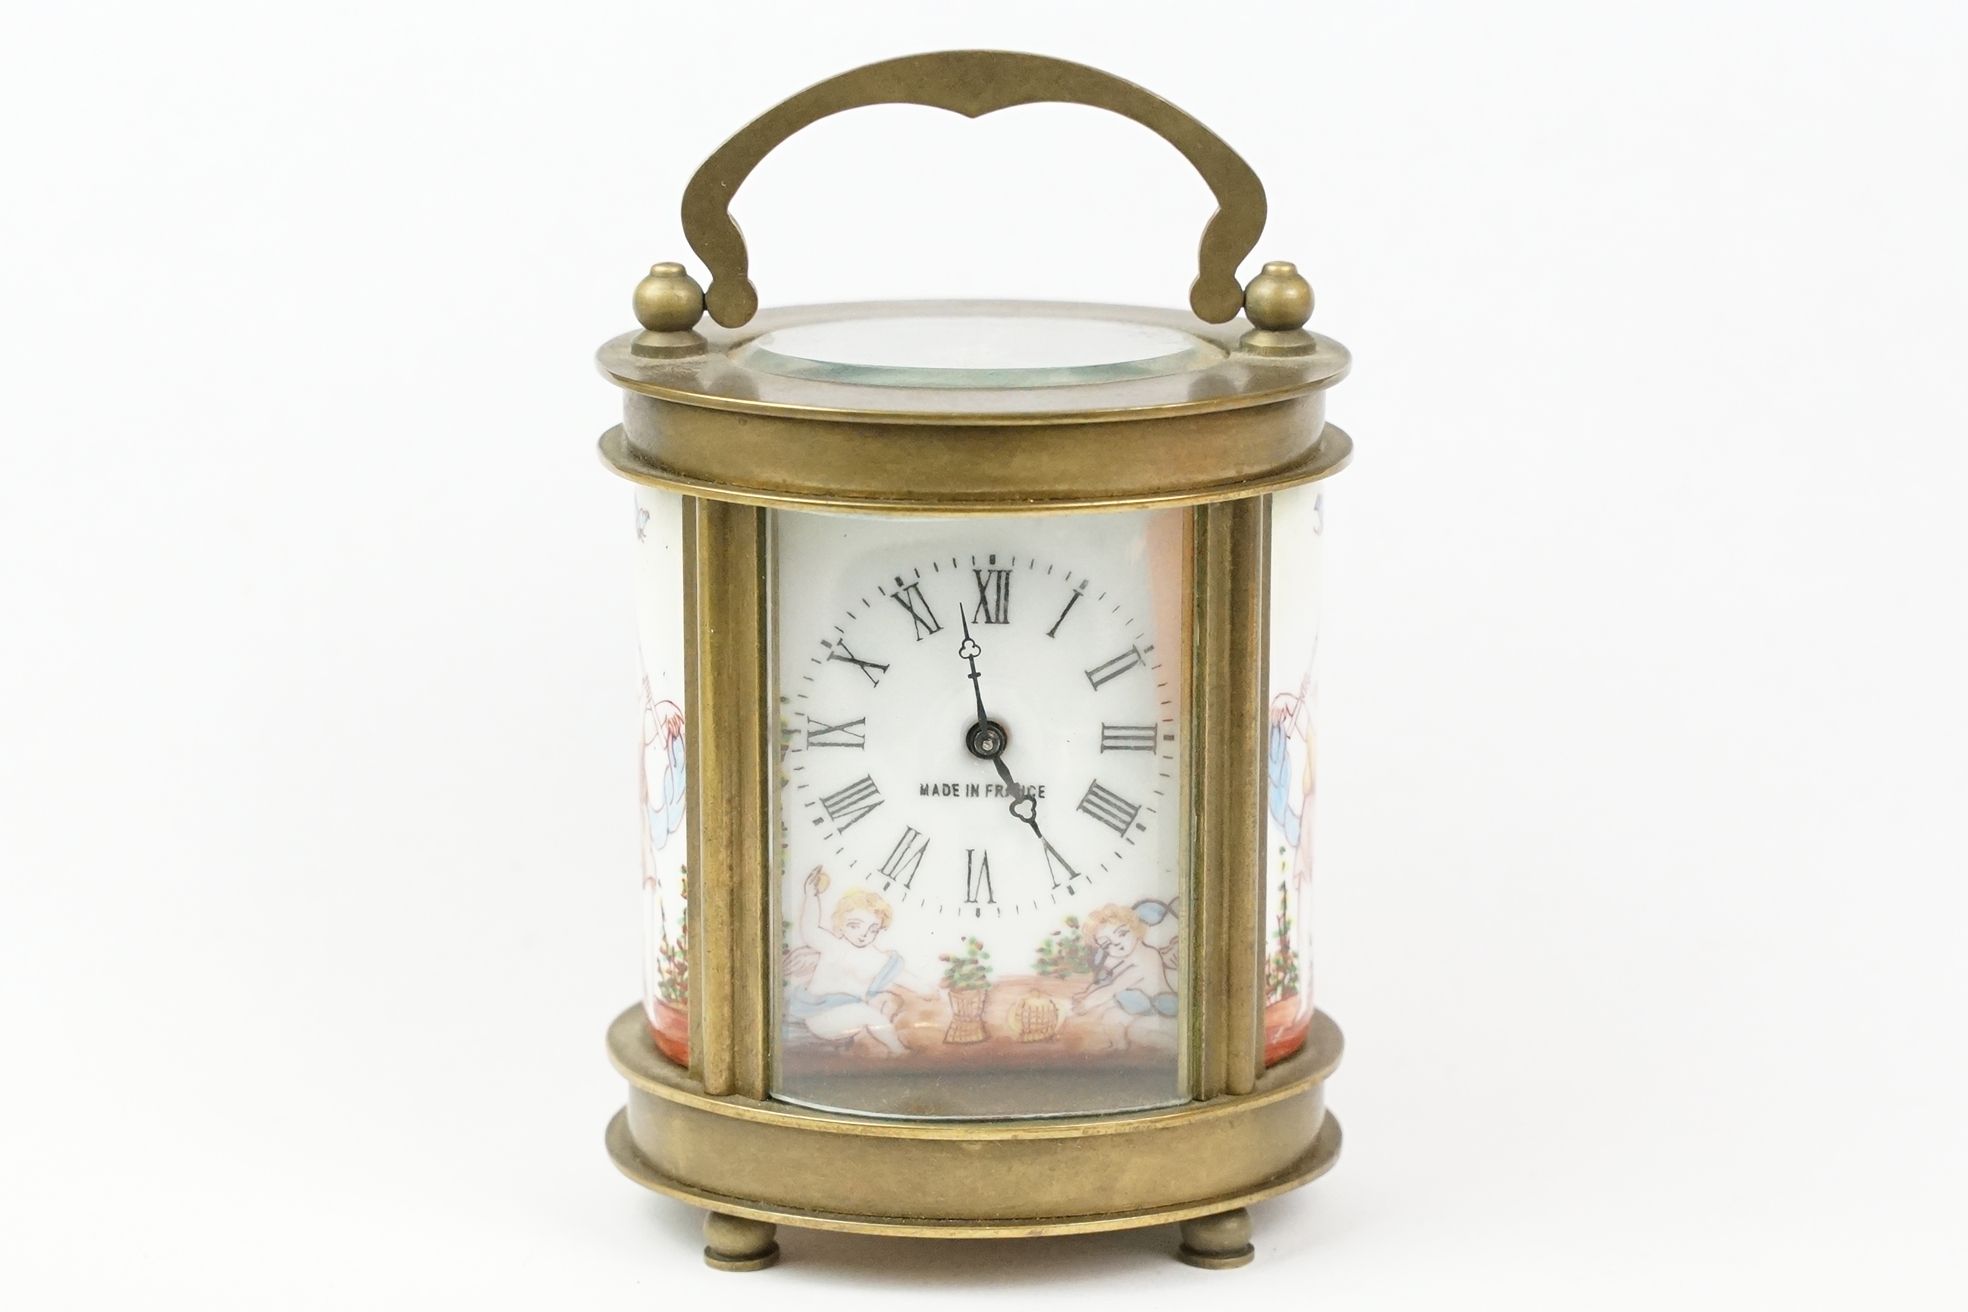 An antique French miniature carriage clock, brass cased with beveled glass panels, decorative Cherub